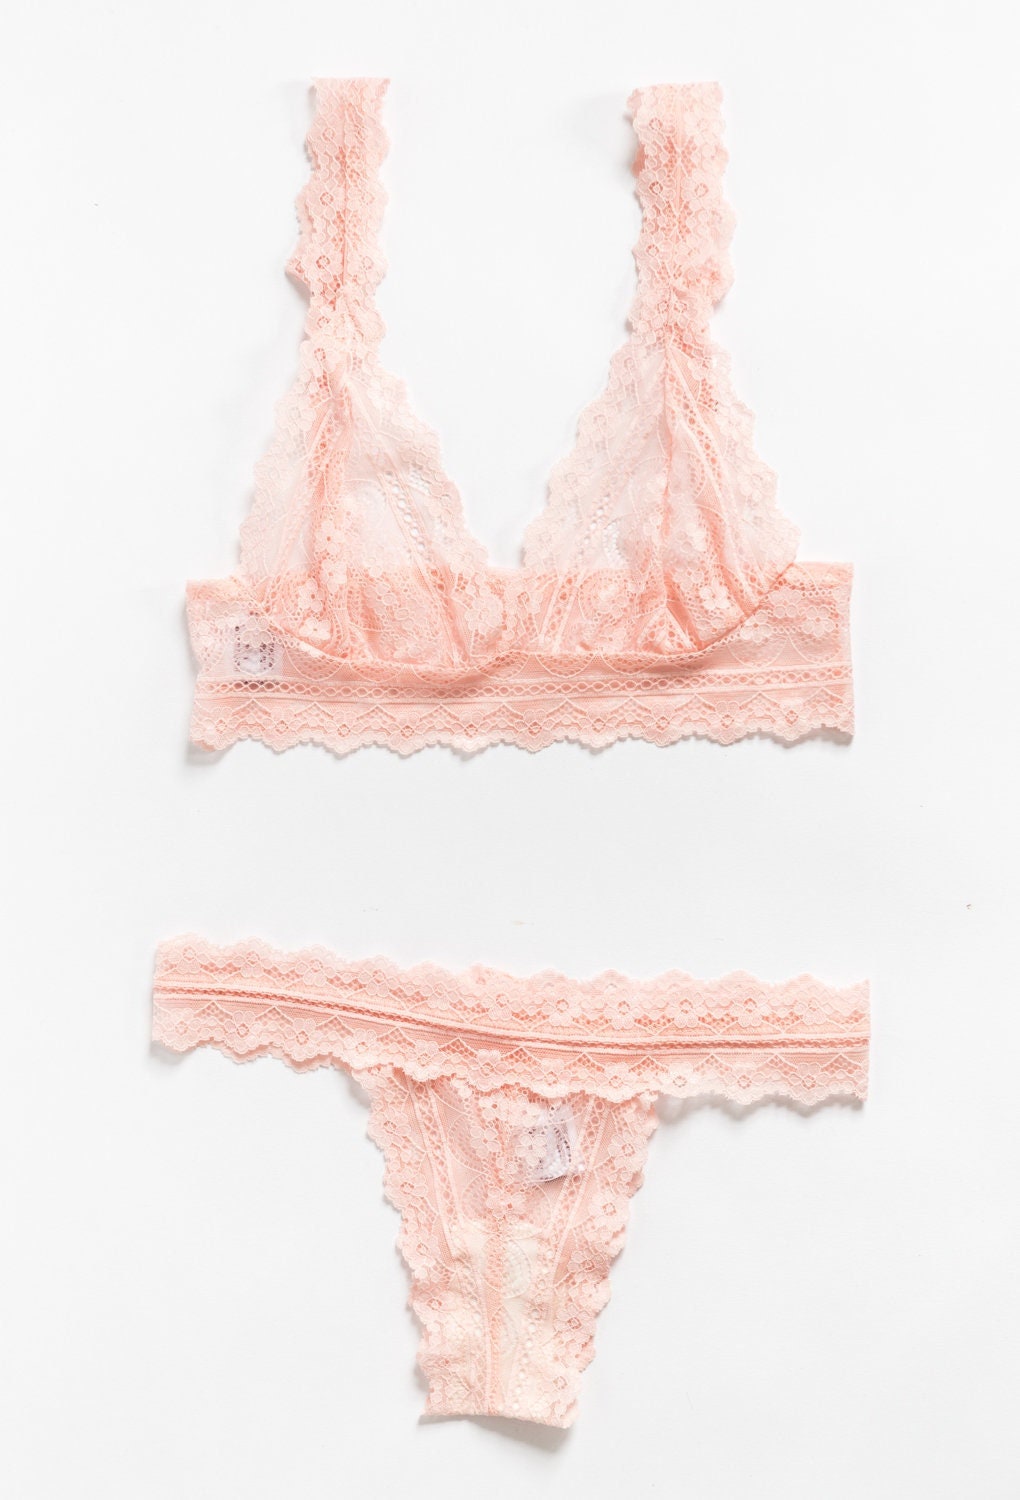 Tea Rose Pale Pink Lace Lace Bralette and Thong Set Pretty Sheer Pink Lace  Lingerie From Brighton Lace 